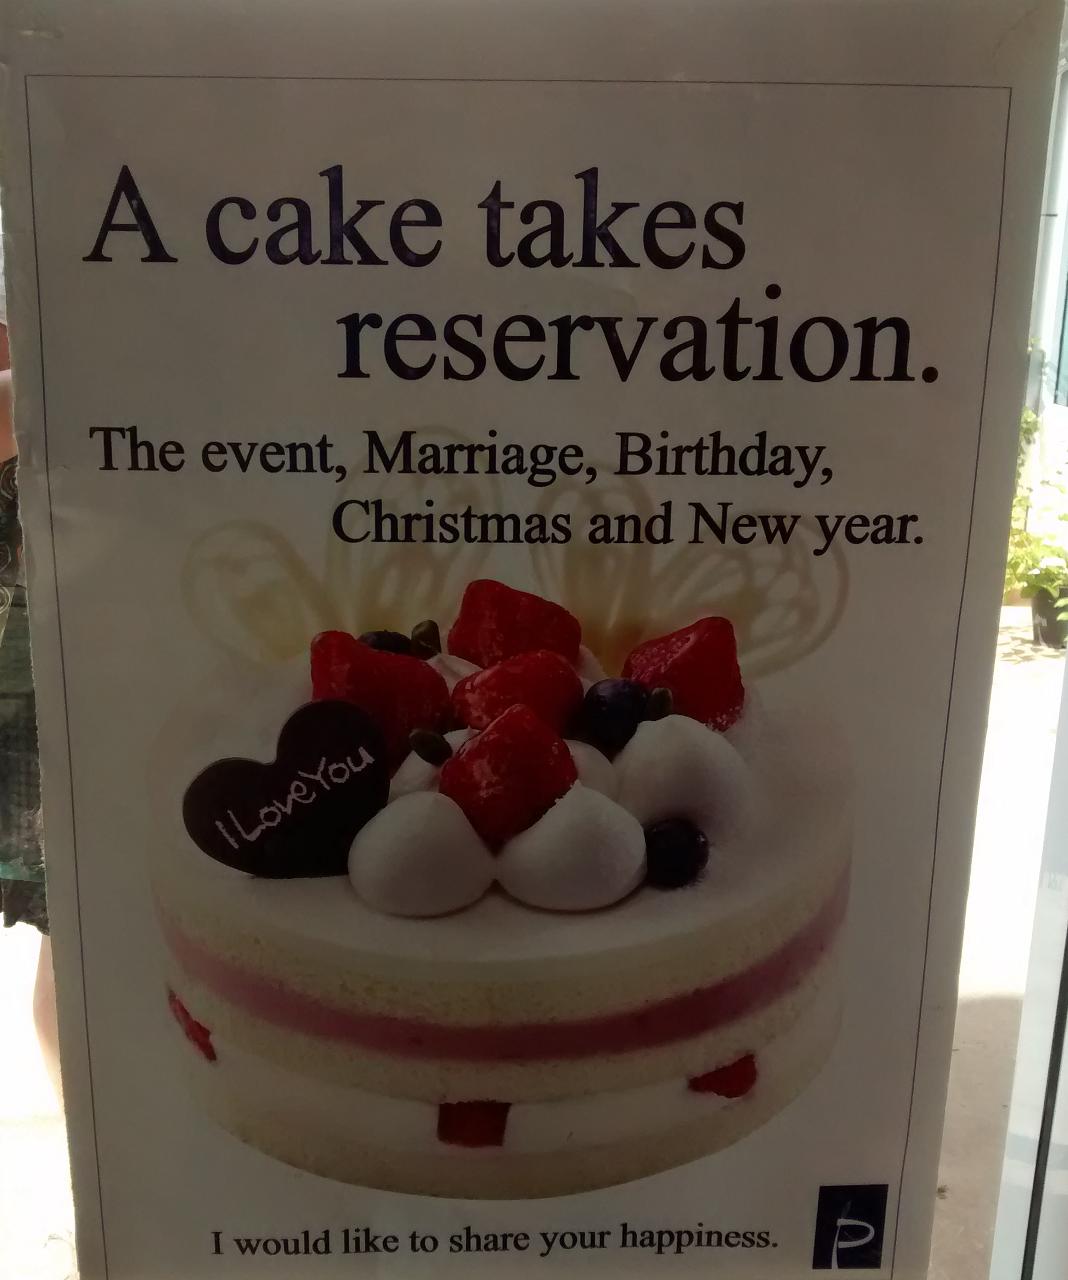 A cake takes reservation